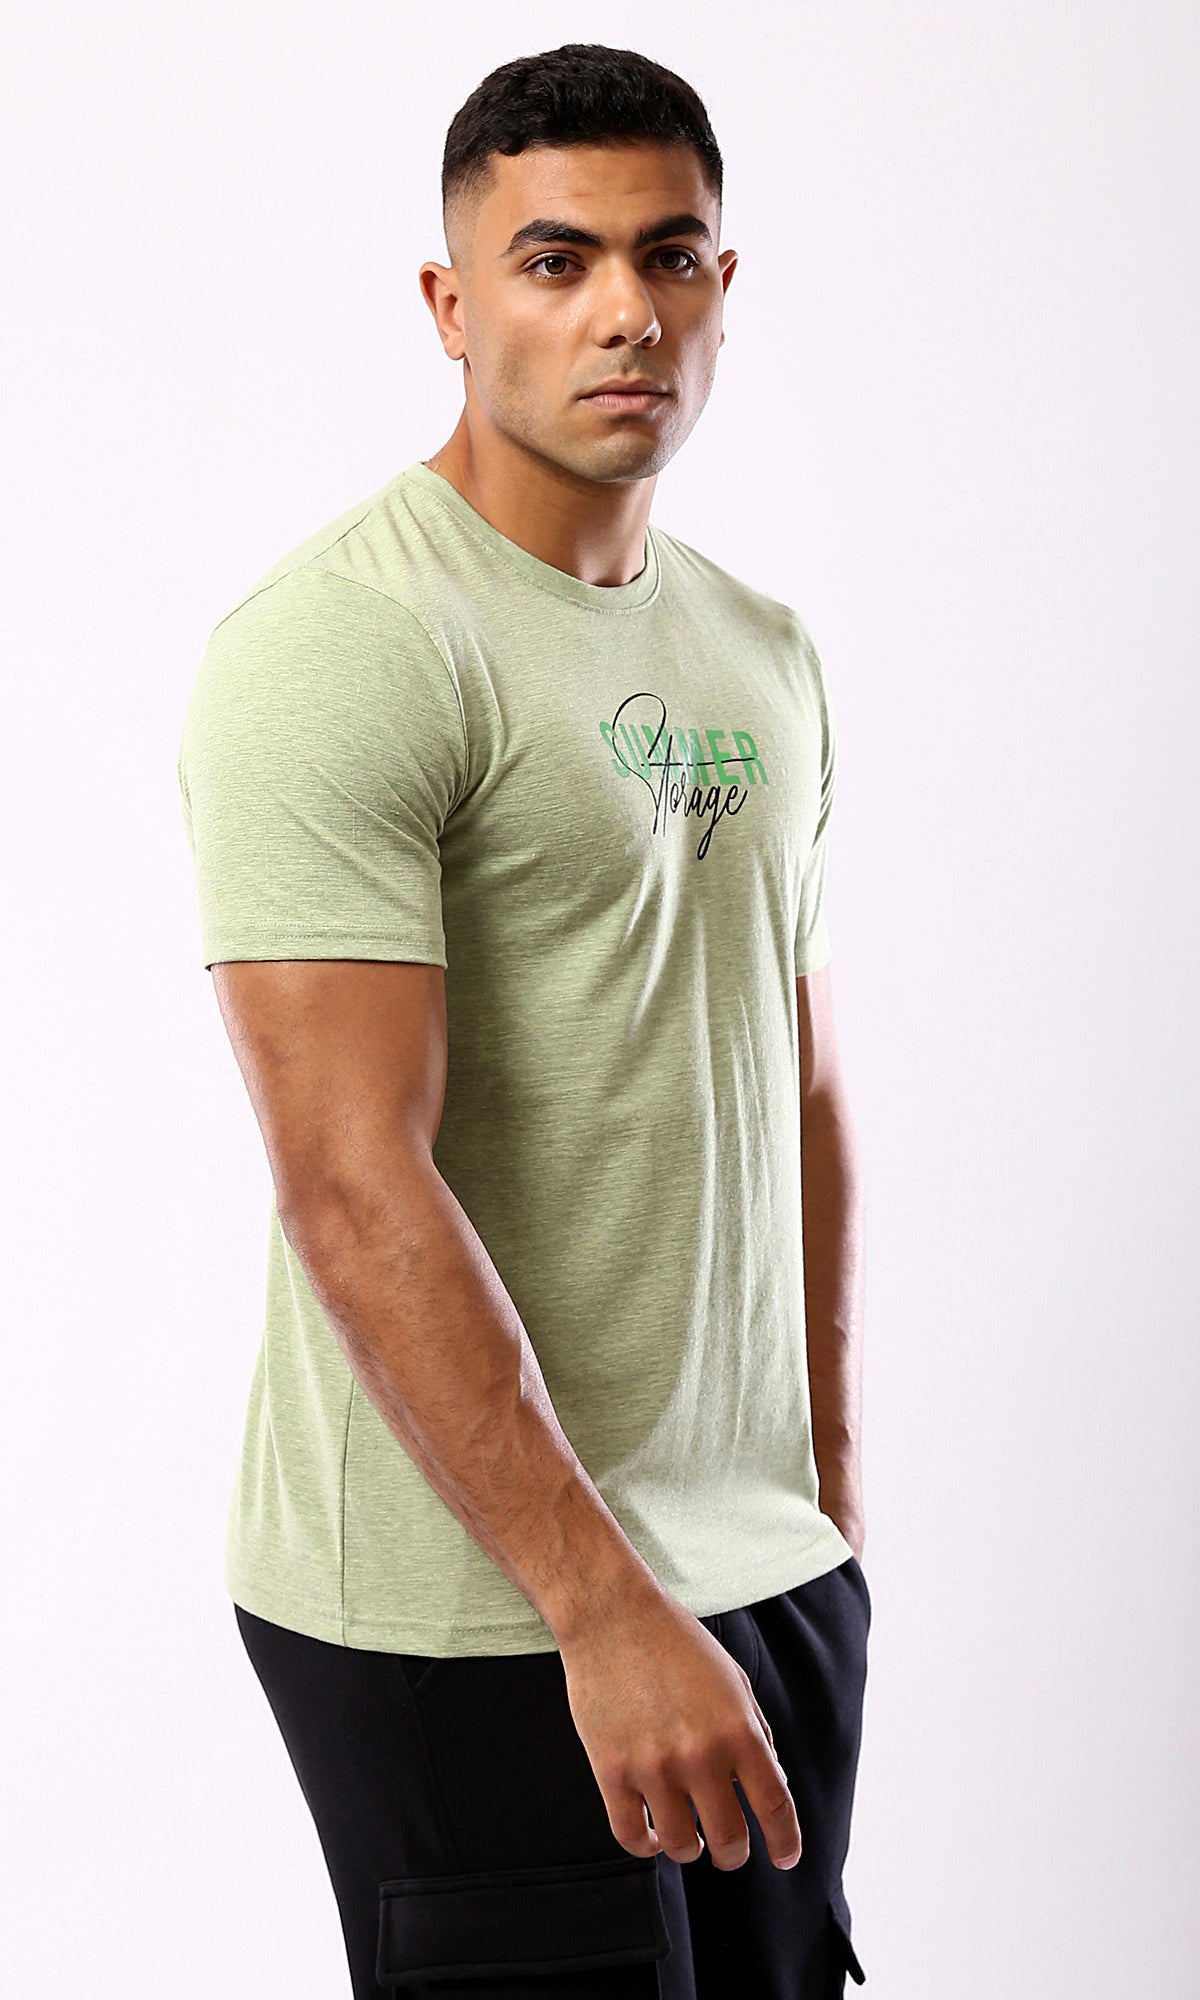 O182125 Round Neck Short Sleeves Printed Tee - Heather Mint